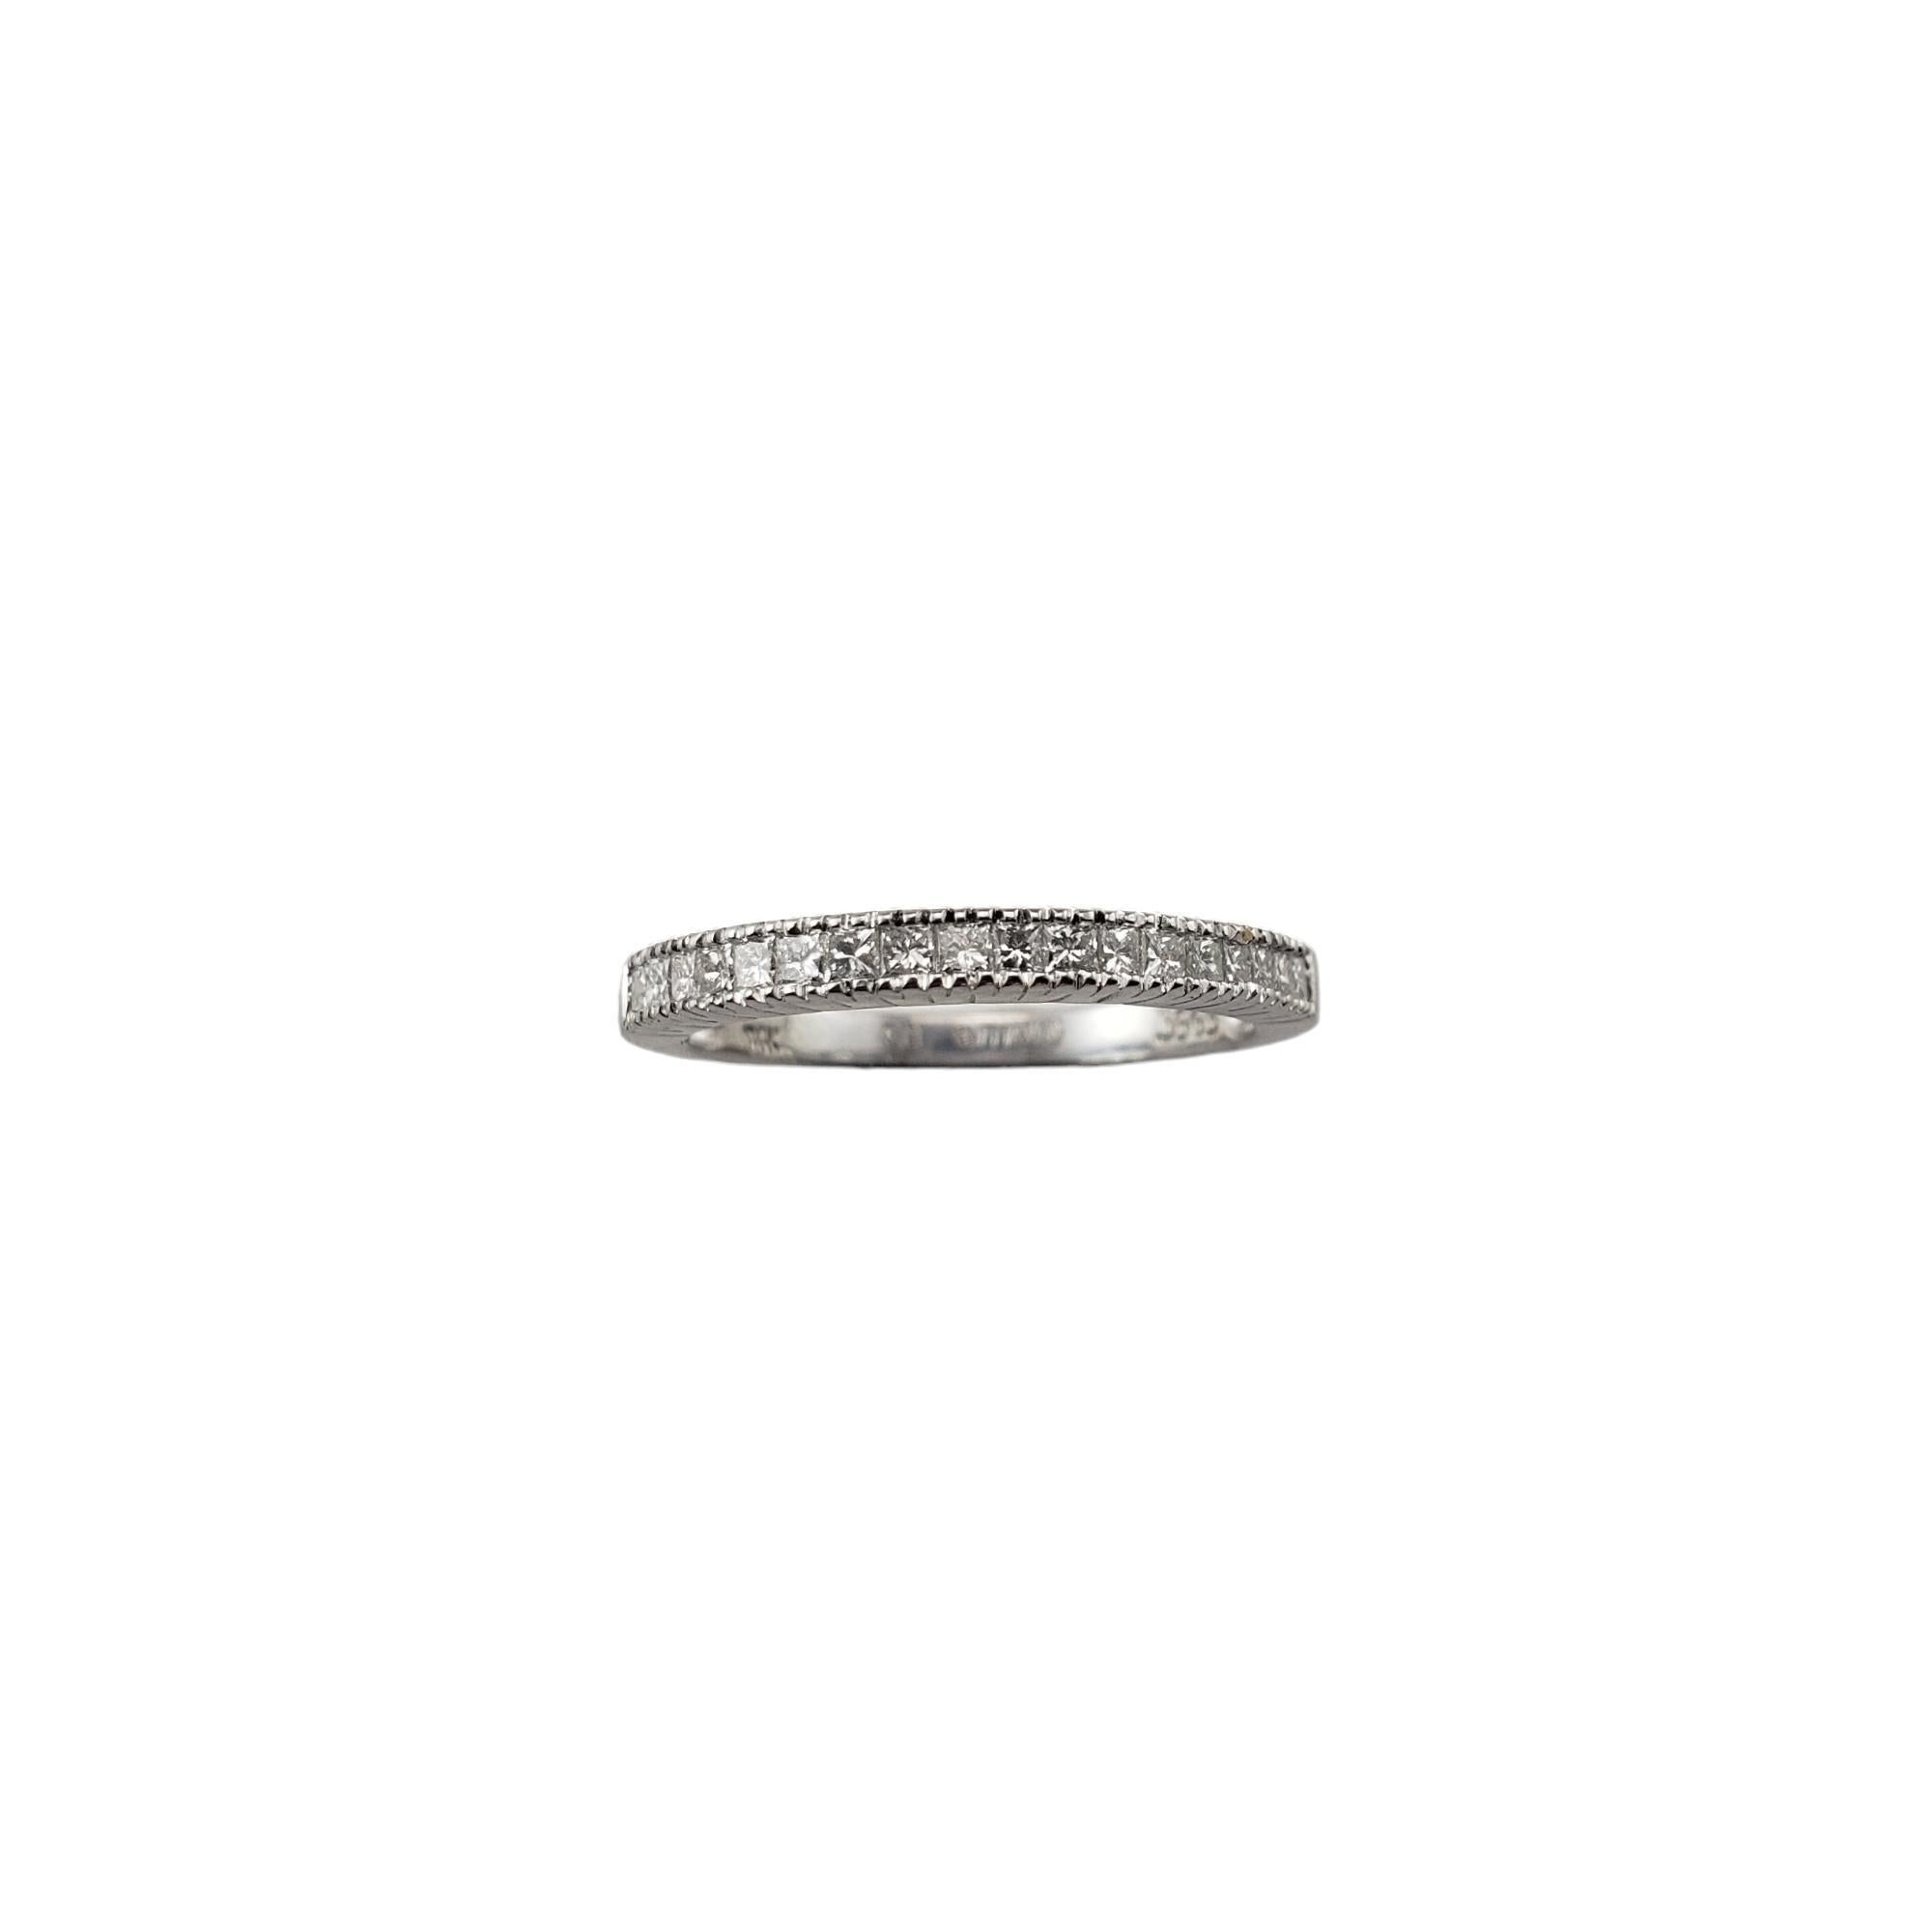 Vintage 14 Karat White Gold and Diamond Band Ring Size 6.5-

This sparkling band features 18 princess cut diamonds set in classic 14K white gold.  Width:  2.1 mm.

Approximate total diamond weight:   .36 ct.

Diamond clarity: VS1

Diamond color: